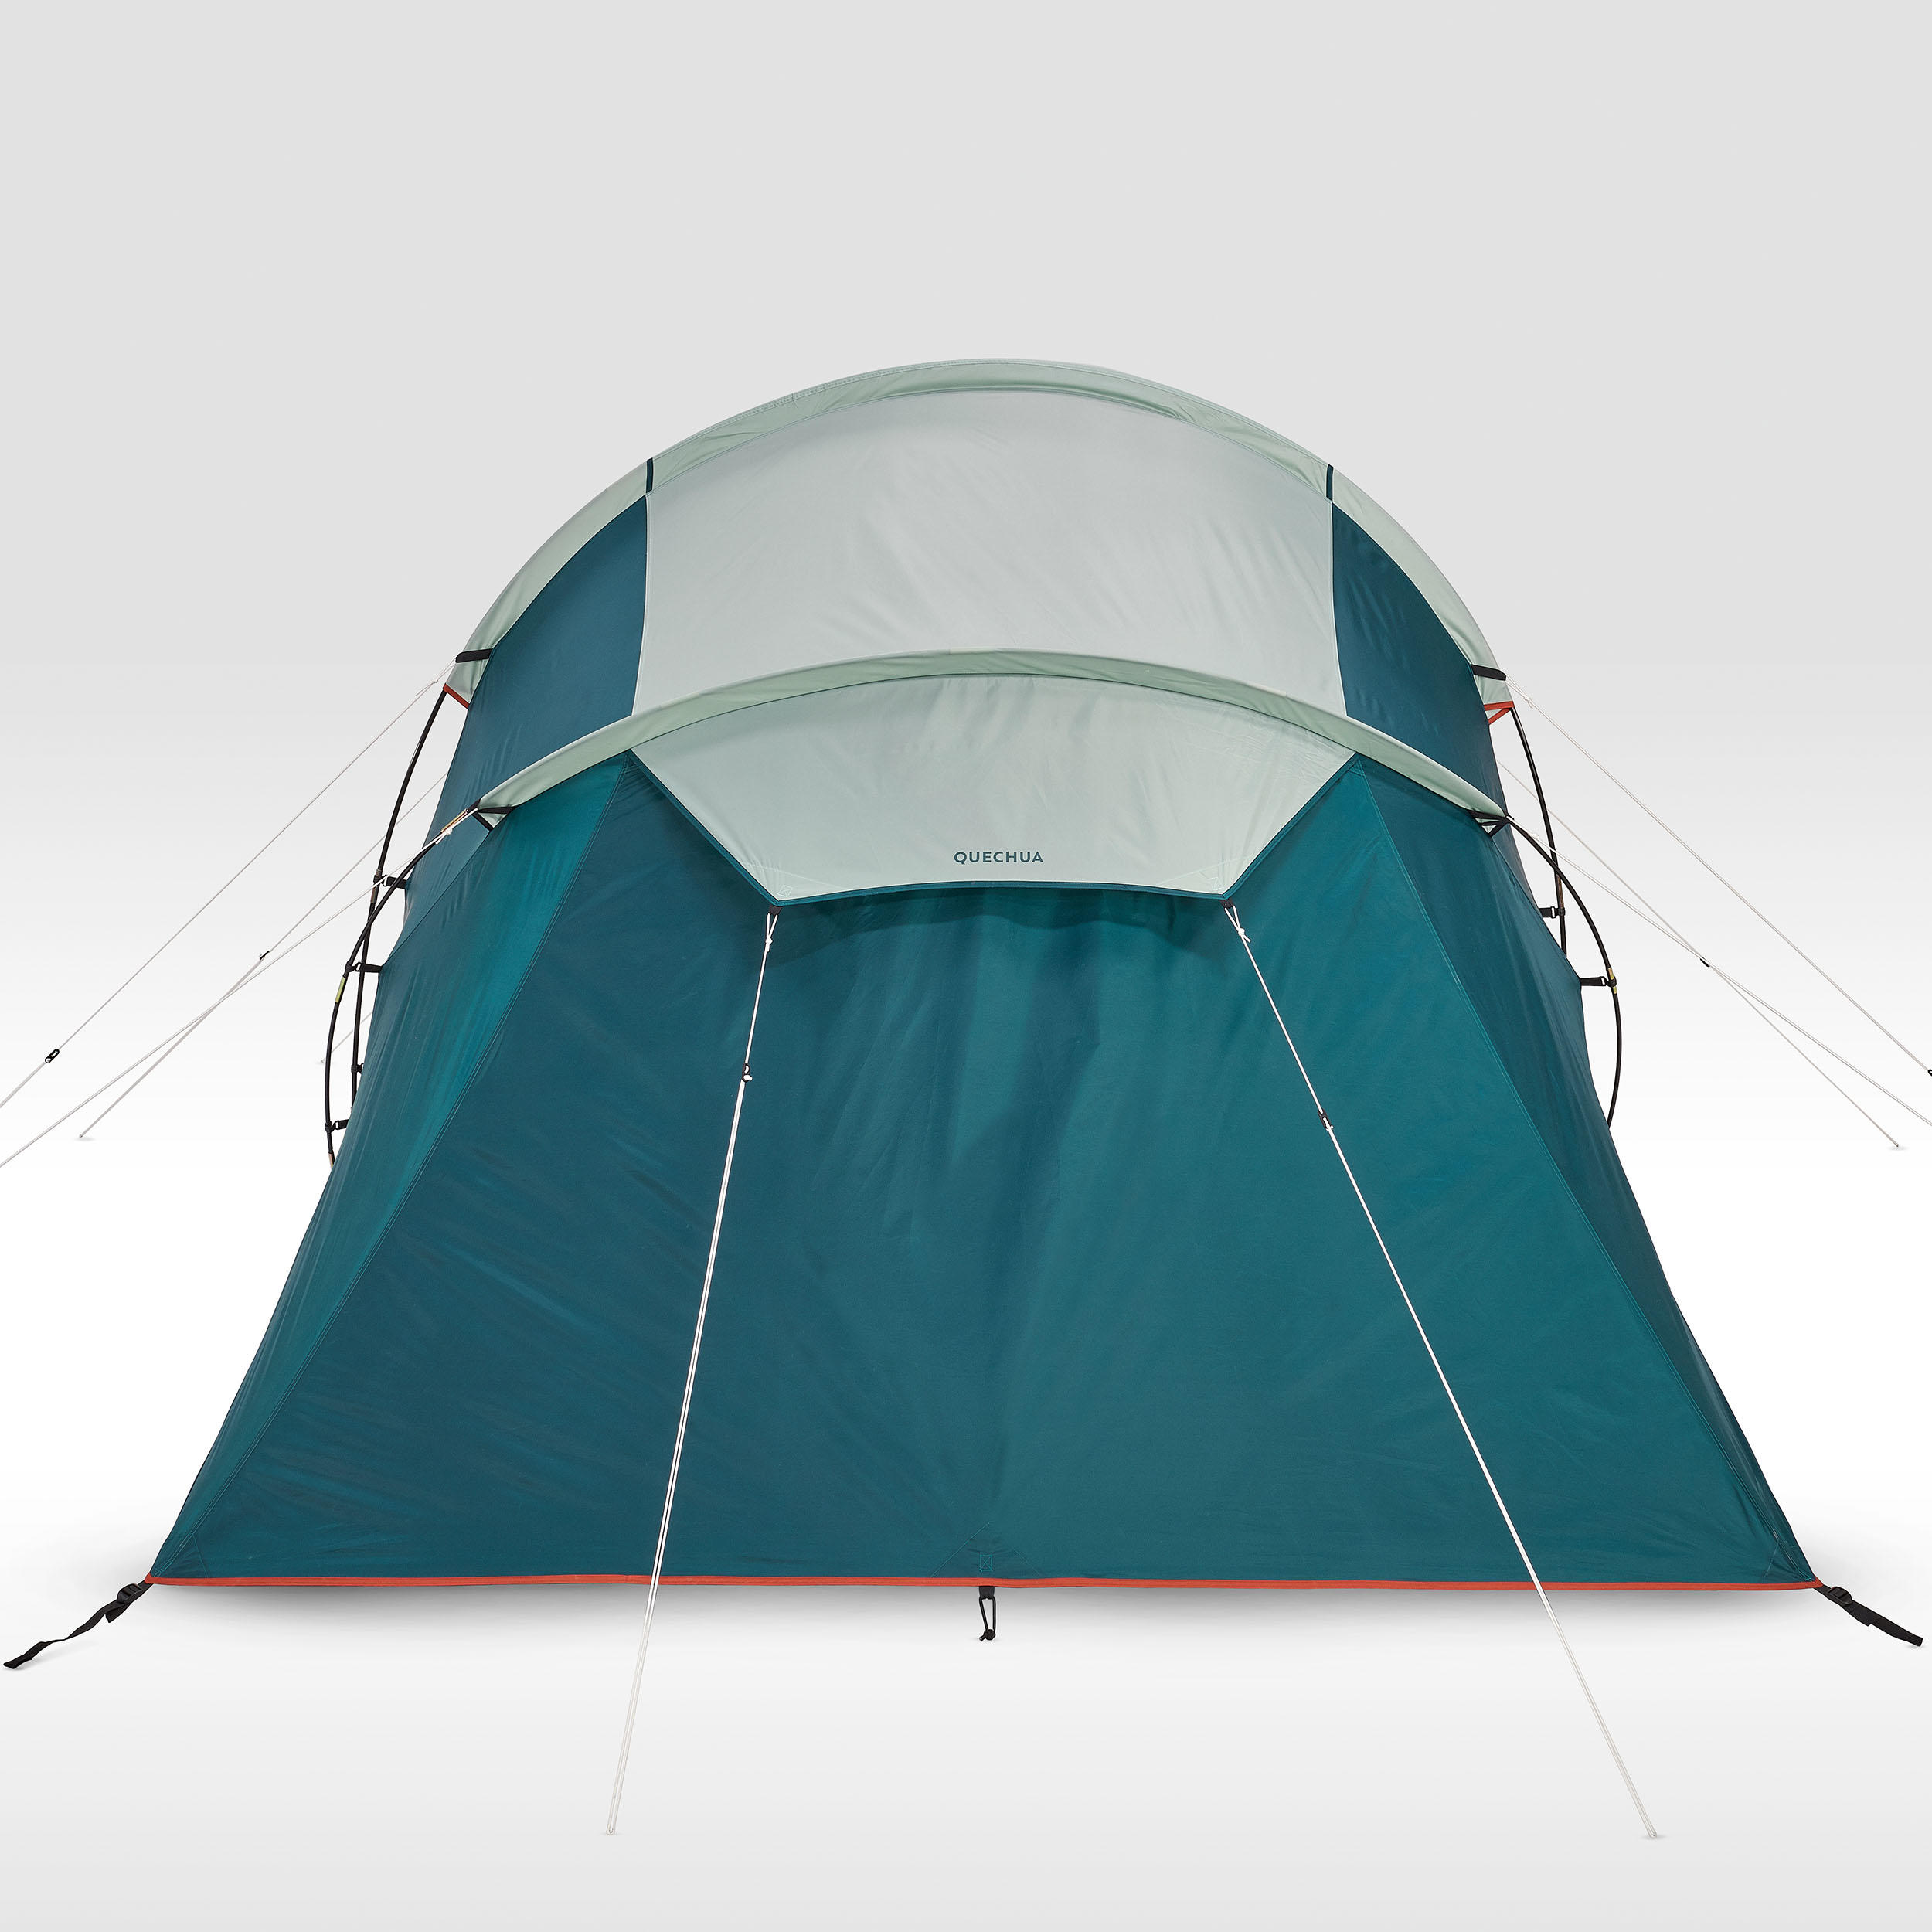 Camping Tent with Poles Arpenaz 4.2 4 People 2 Bedrooms 9/18